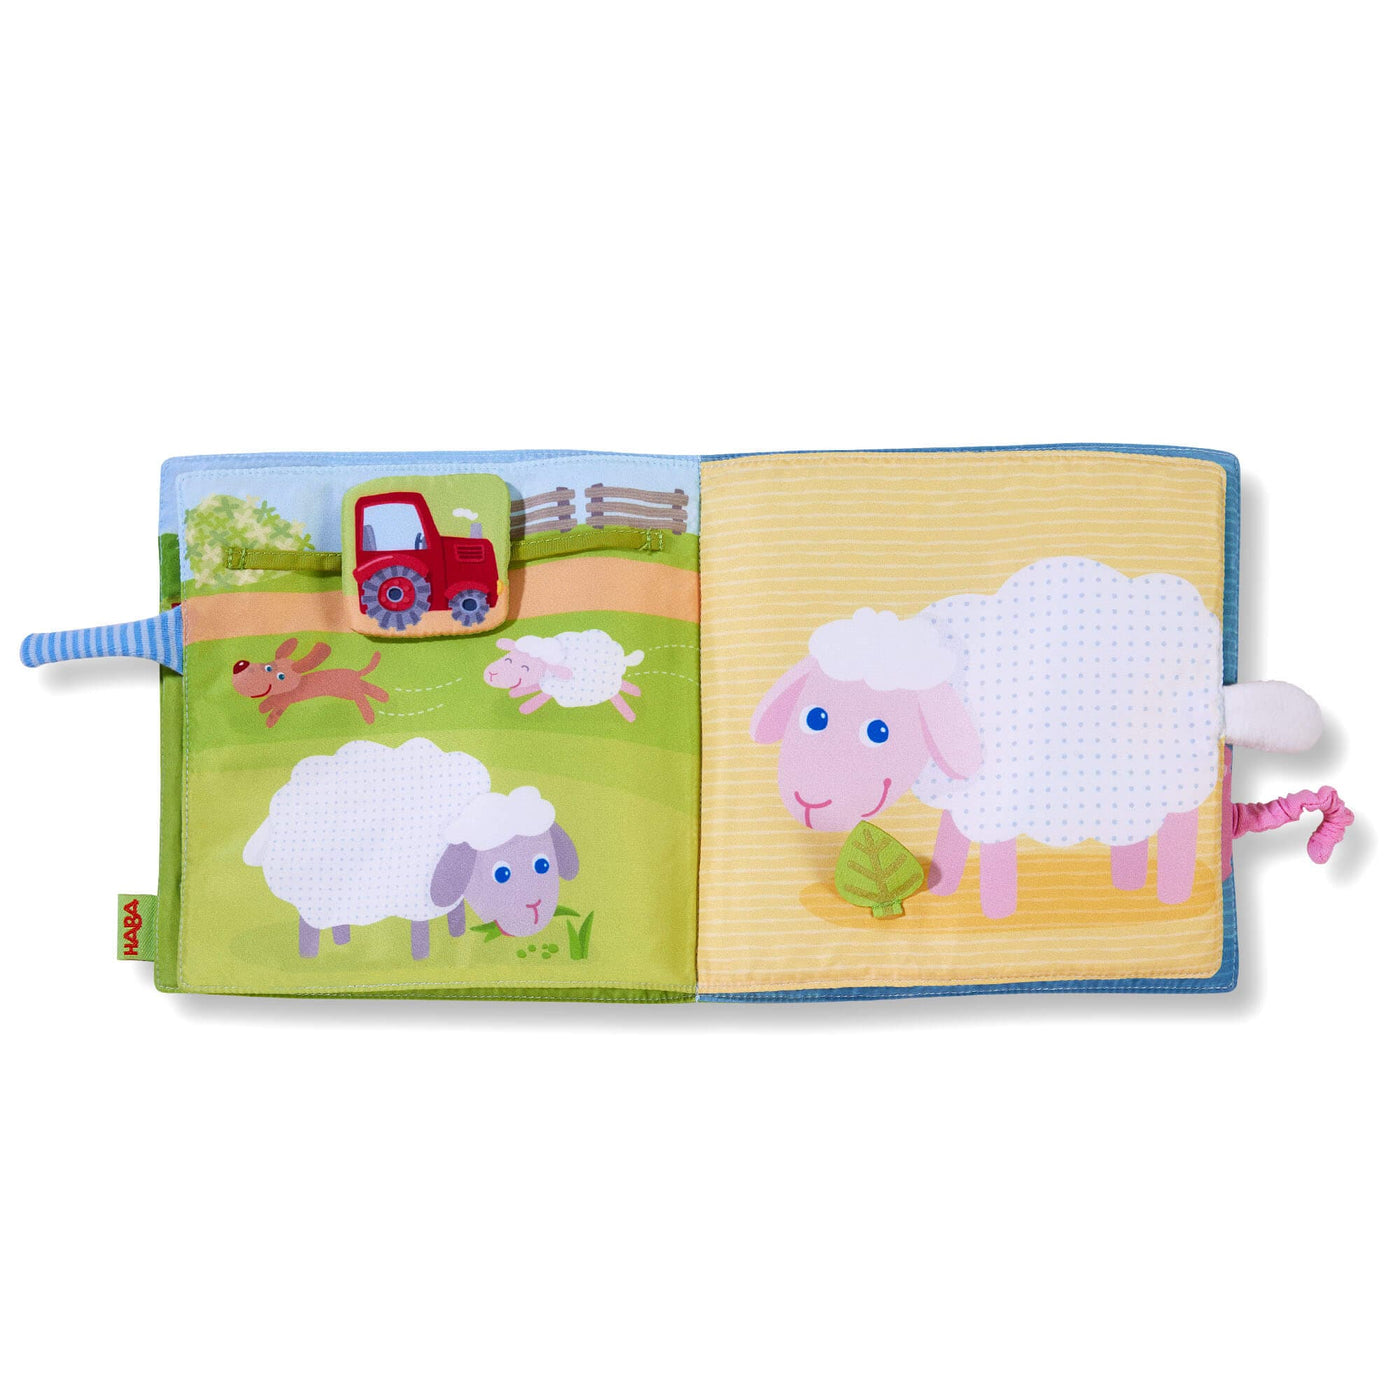 Down on the Farm Soft Book with Cow Puppet - HABA USA